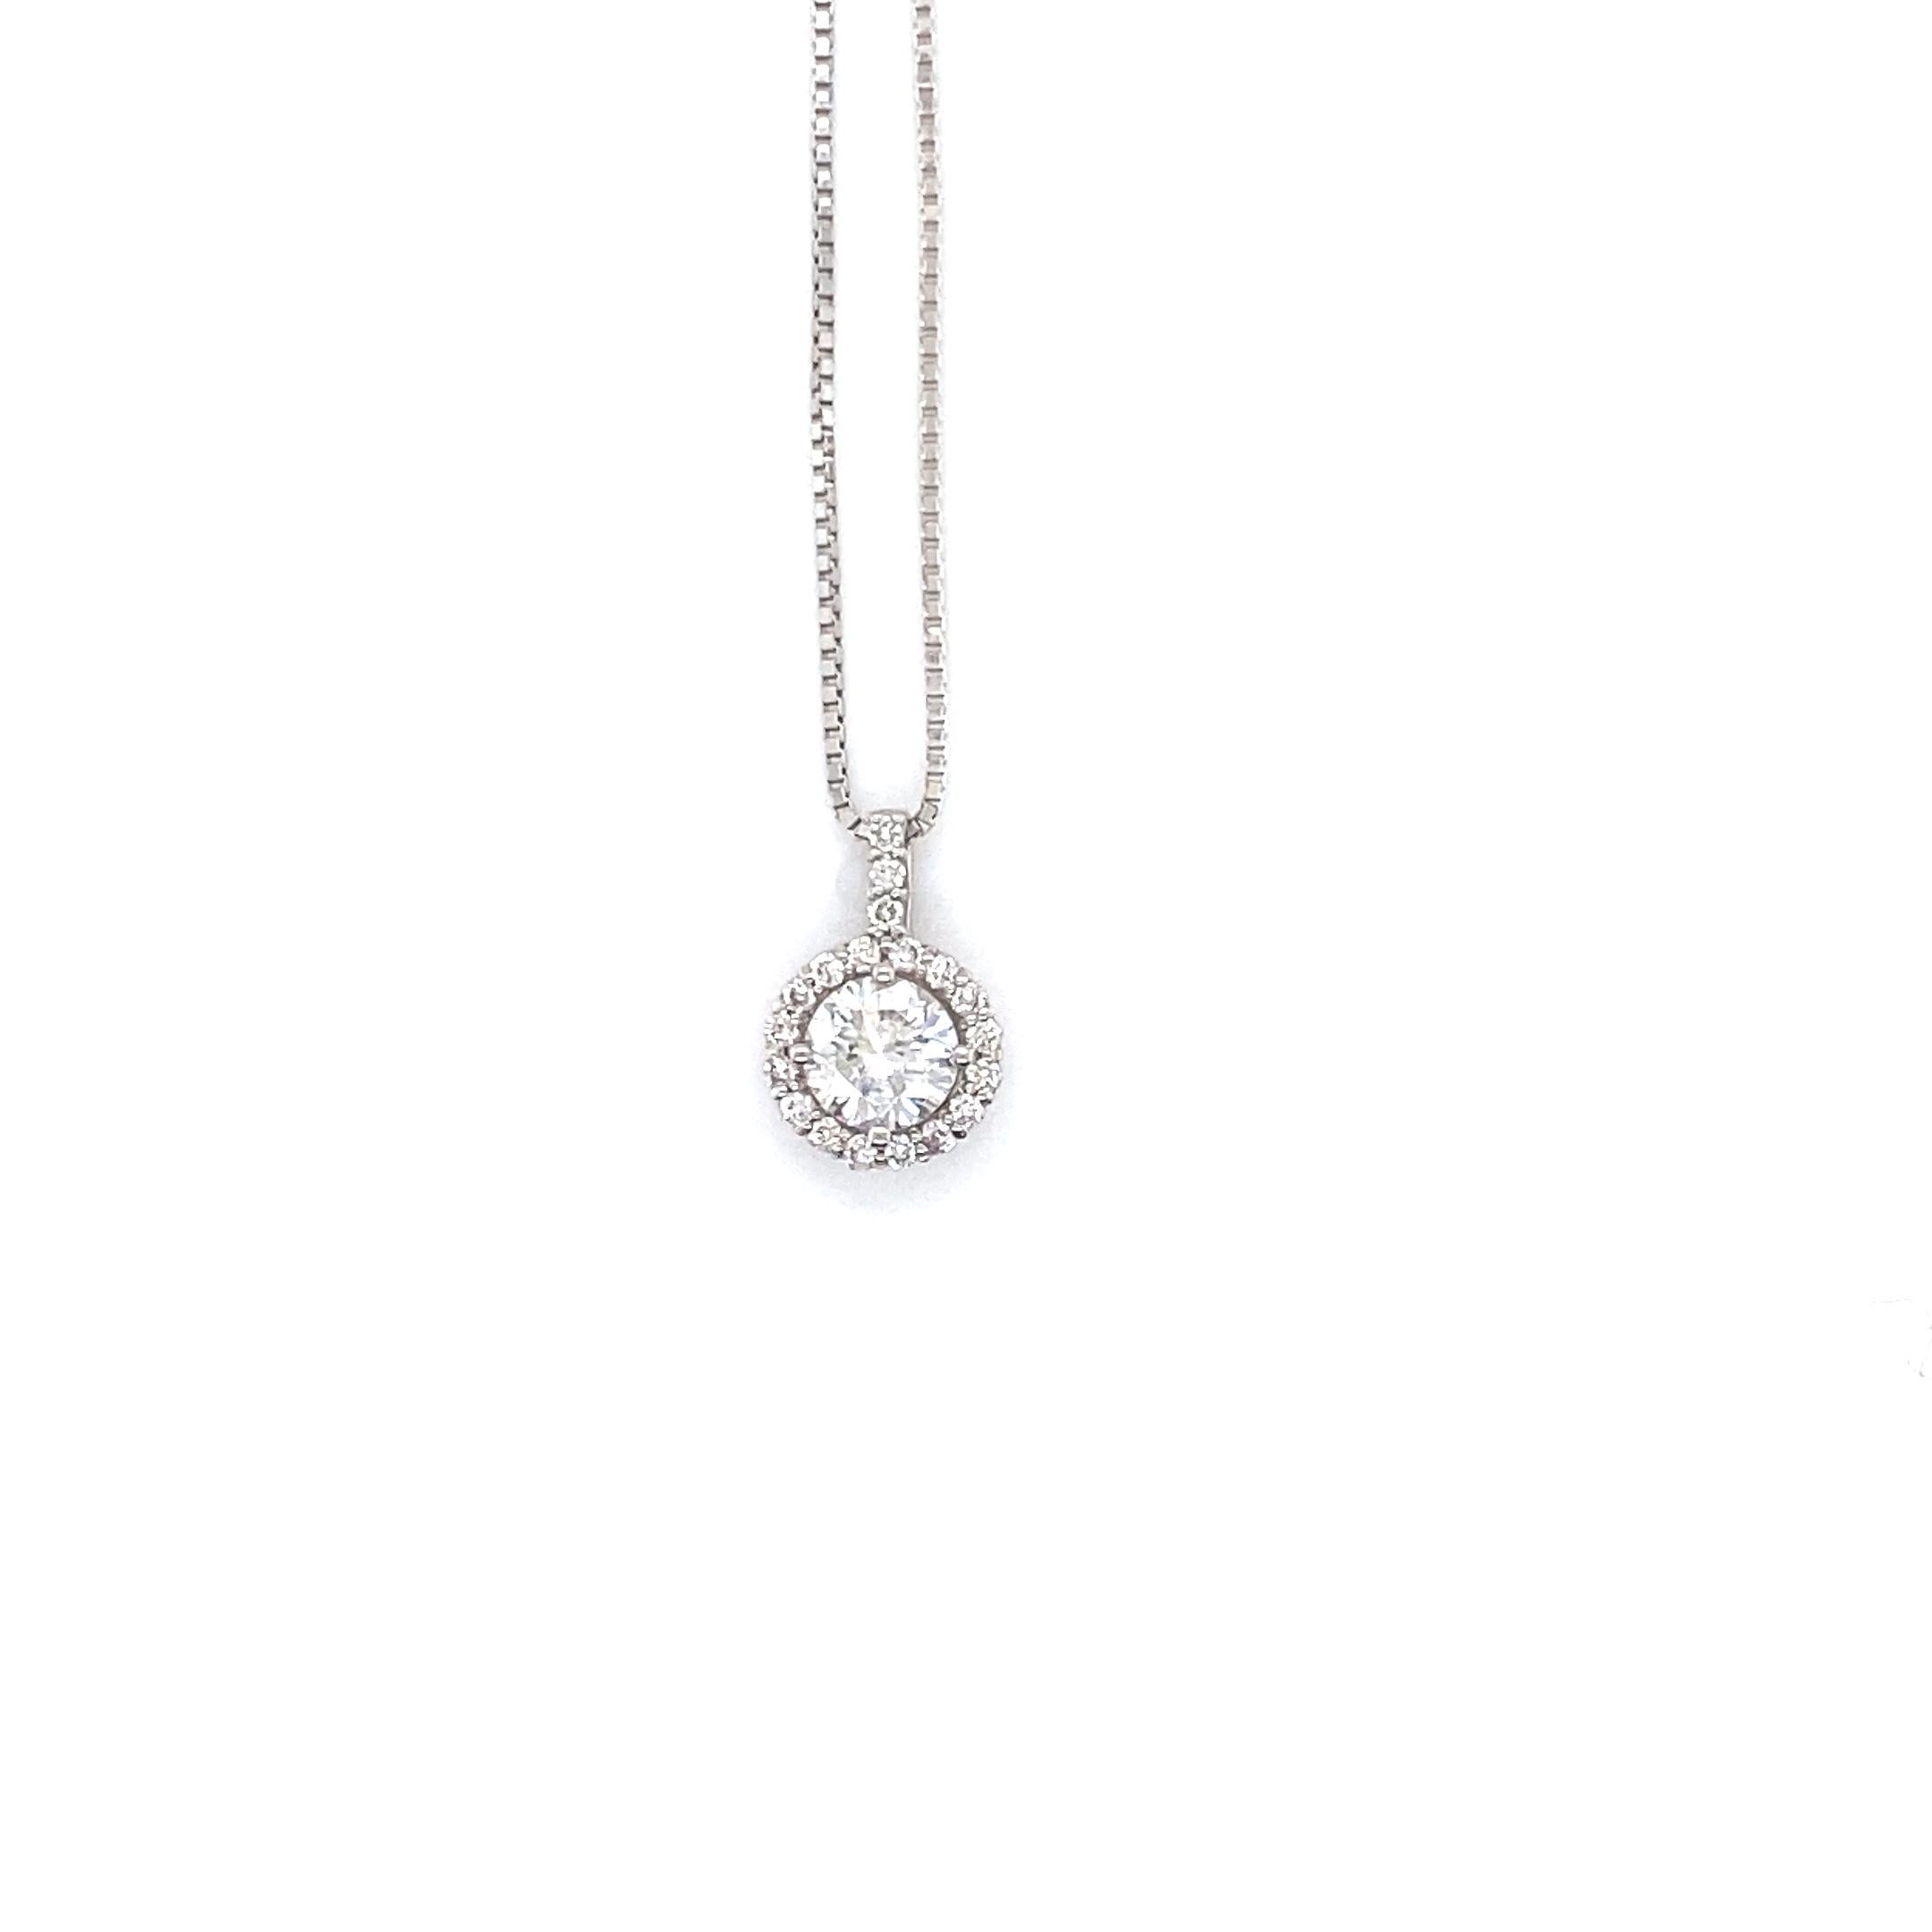 A stunning Pendant Necklace featuring a natural 0.50 Carat Round Brilliant Diamond (center) and 0.10 Carats of Diamond Accents set in Platinum. The Diamond's grade is H, SI-2, Very Good. Diamonds have been adorned and cherished throughout human